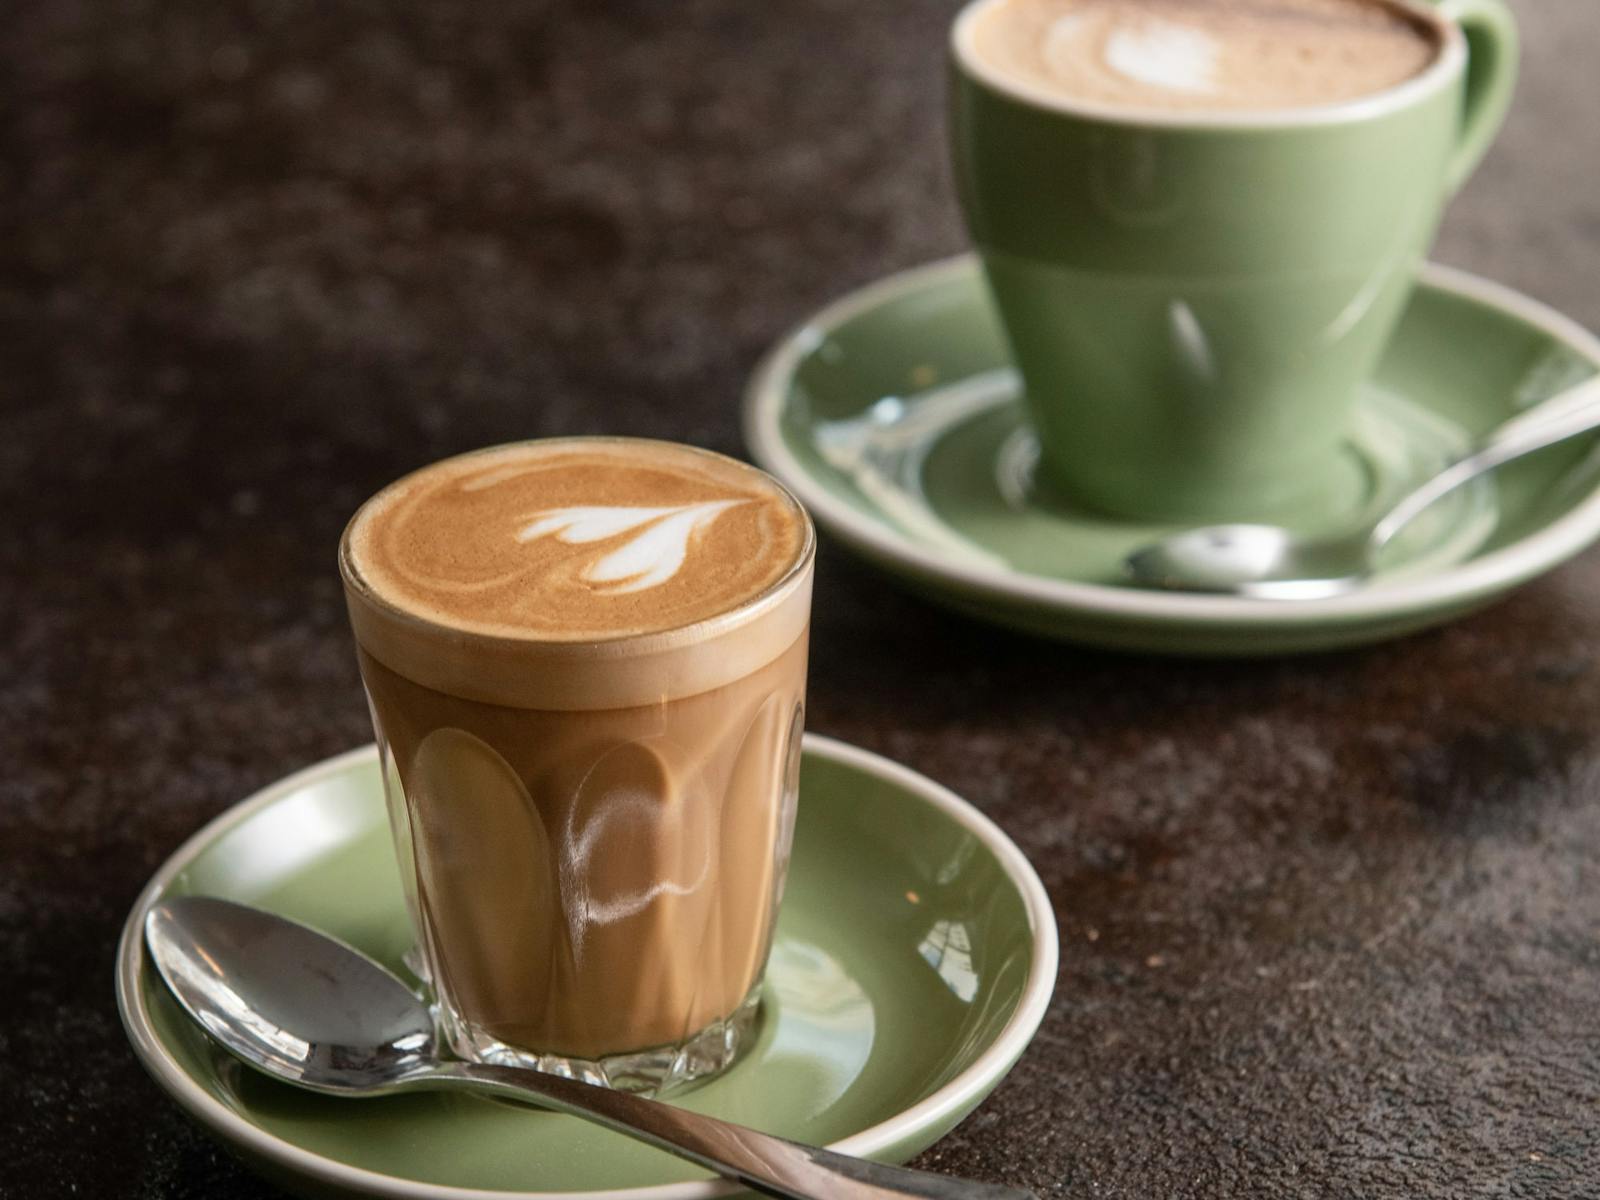 All of your coffee favourite available seven days. Latte and flat white pictured here.